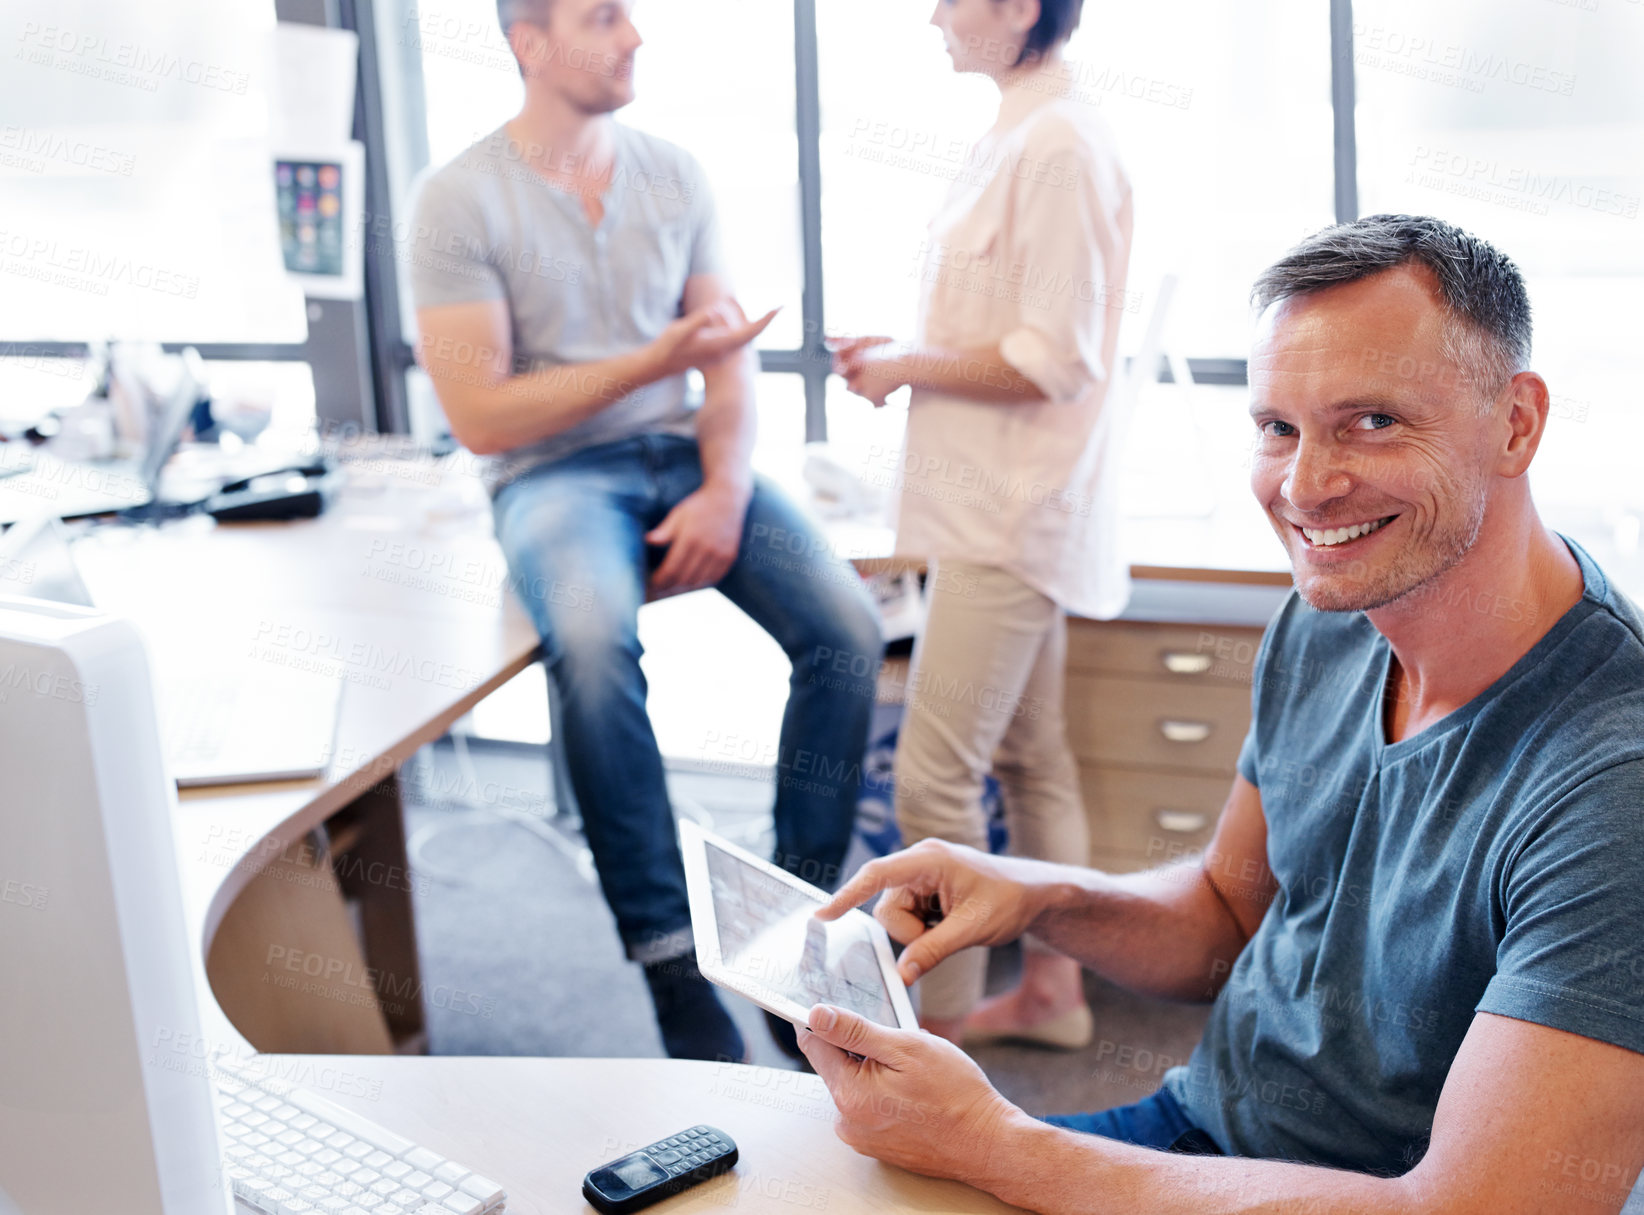 Buy stock photo Shot of an office worker using a tablet while his coworkers have a discussion in the background